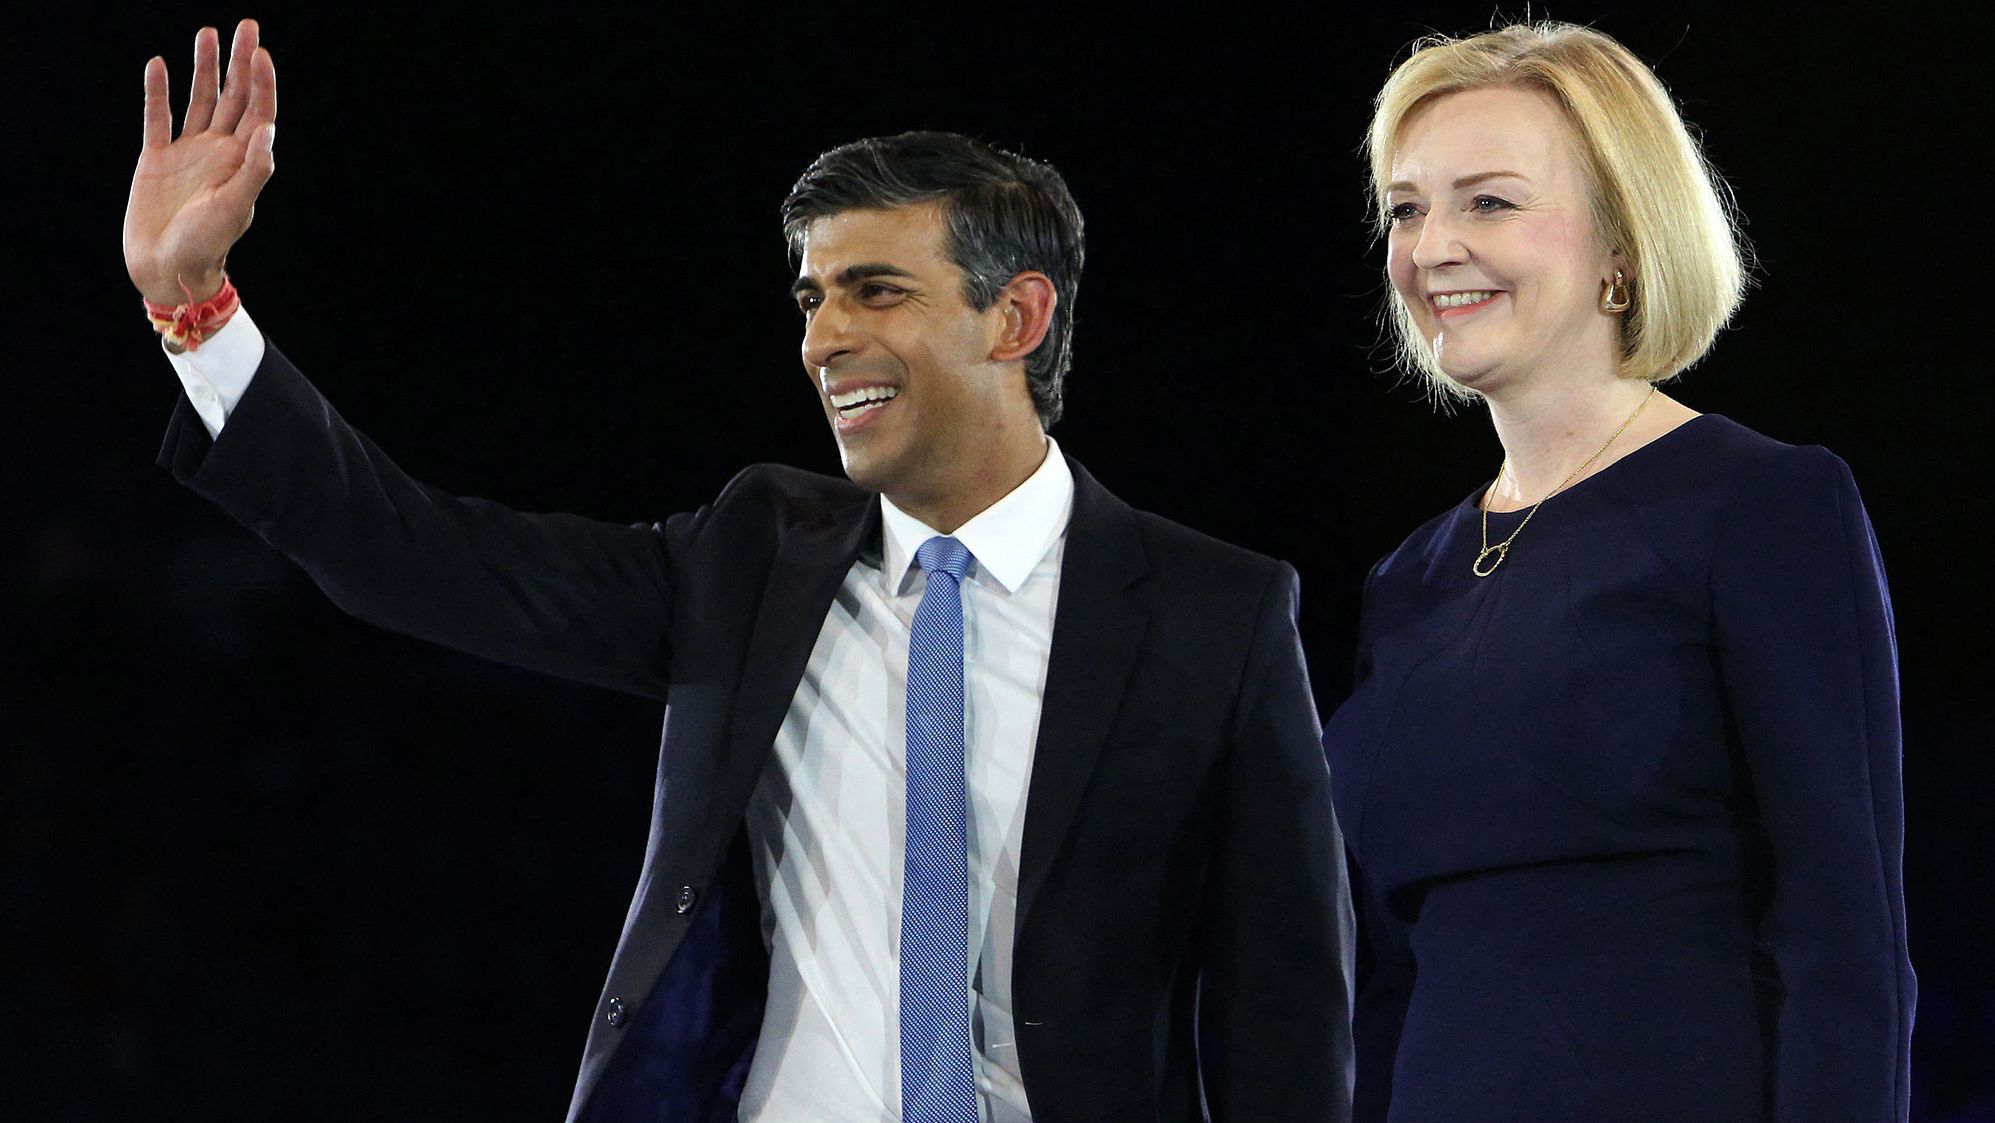 Sunak and Liz Truss stand together on stage during the final Conservative Party Hustings event in London in August 2022. At the time, they were the final two contenders to become the country's next Prime Minister. Truss defeated Sunak with 81,326 votes to 60,399 among party members. When she announced her resignation weeks later, he became the frontrunner to replace her.